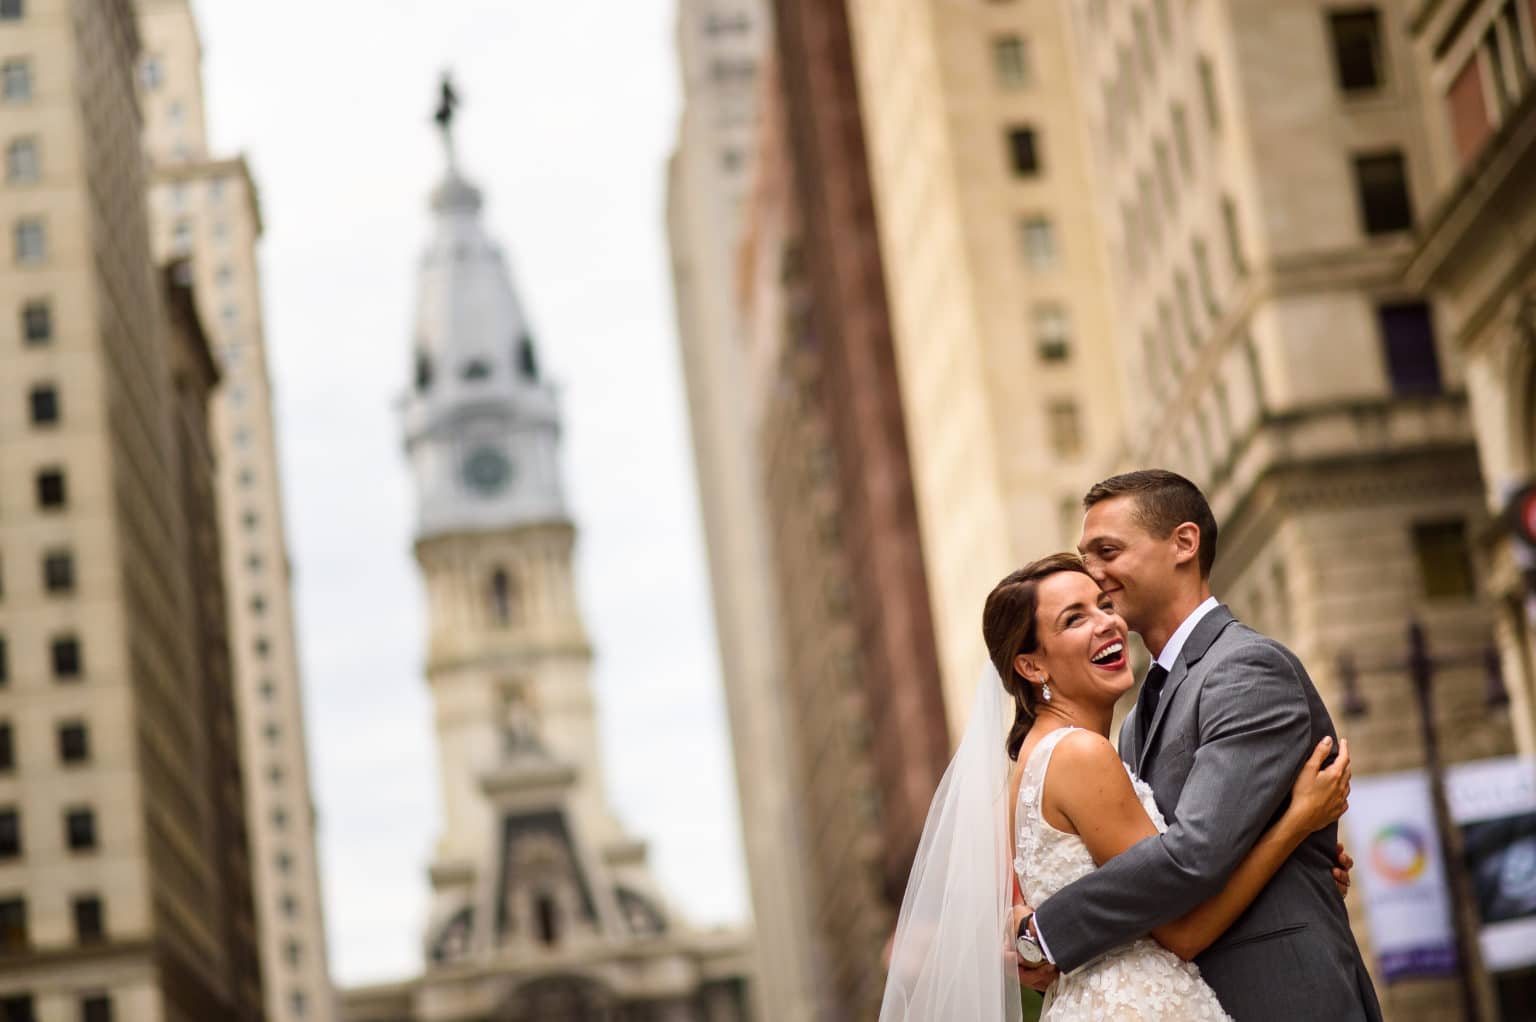 Bride and groom hug each other with Philadelphia's City Hall in the background.